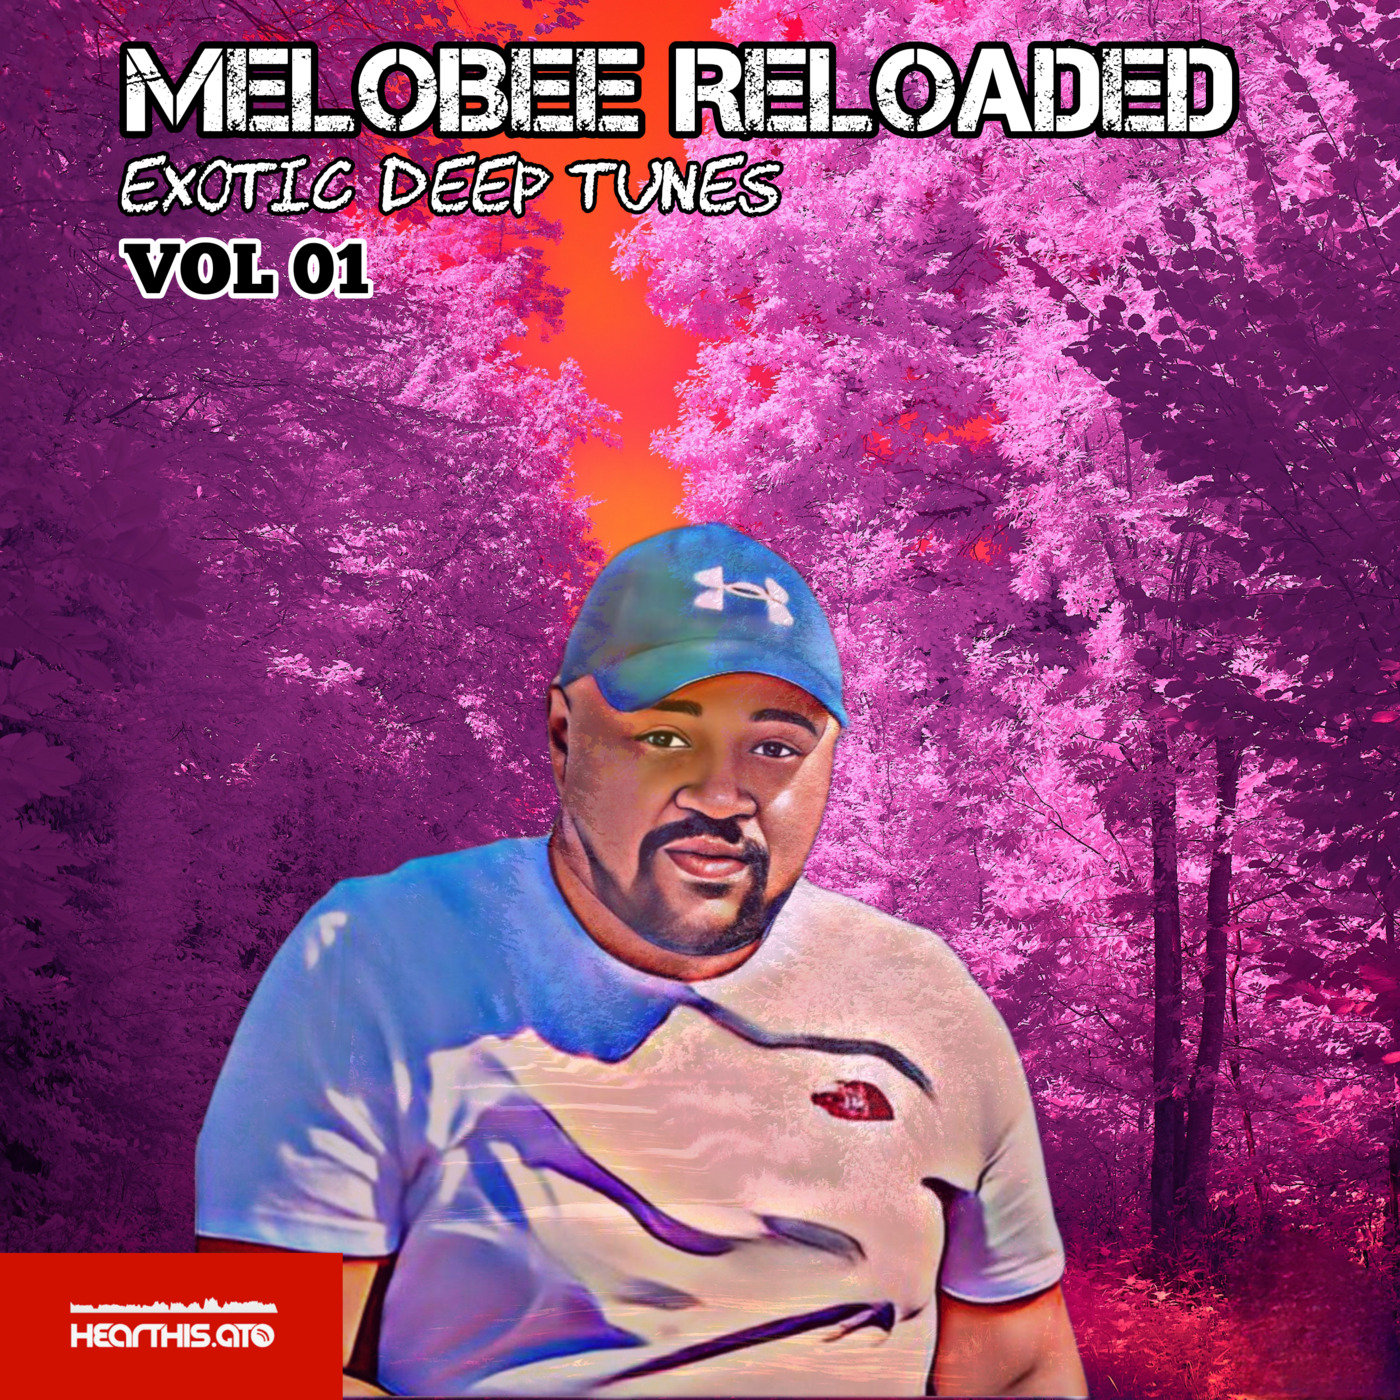 Melobee Reloaded - Exotic Deep Tunes Vol 01